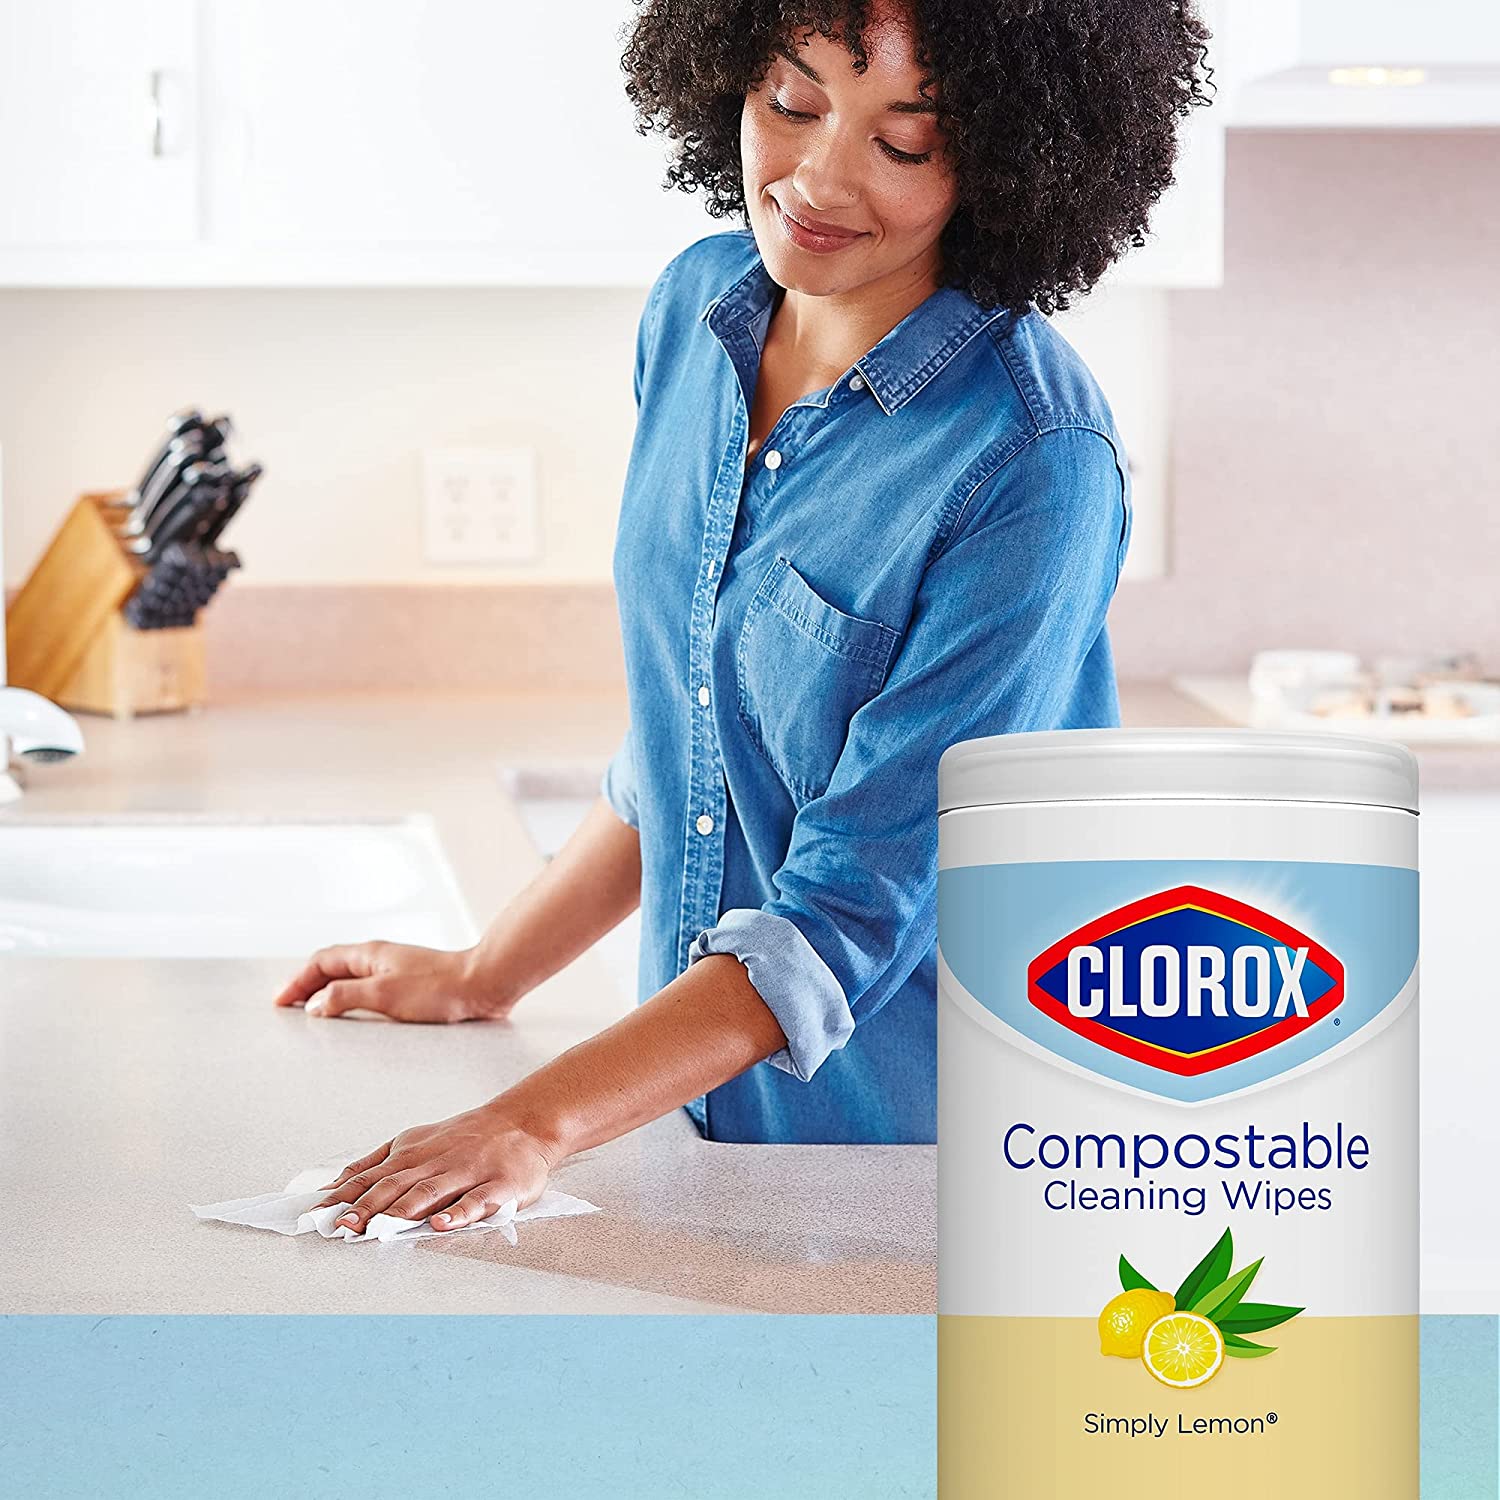 Smiling Woman of Color cleans kitchen counter  with wipe; inset image of Clorox composable wipes.